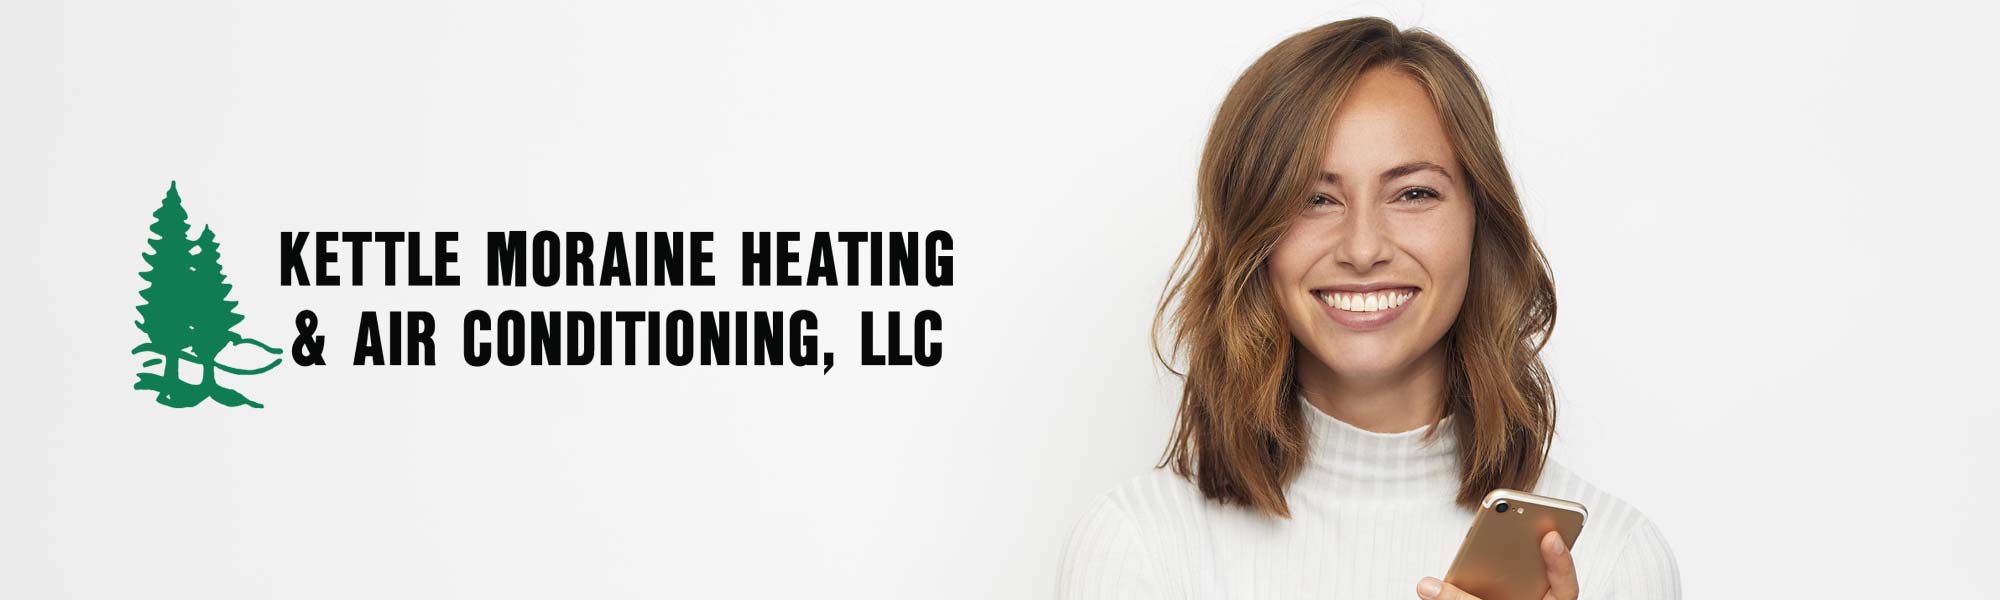 Woman on phone - Contact Us - Kettle Moraine Heating & Air Conditioning